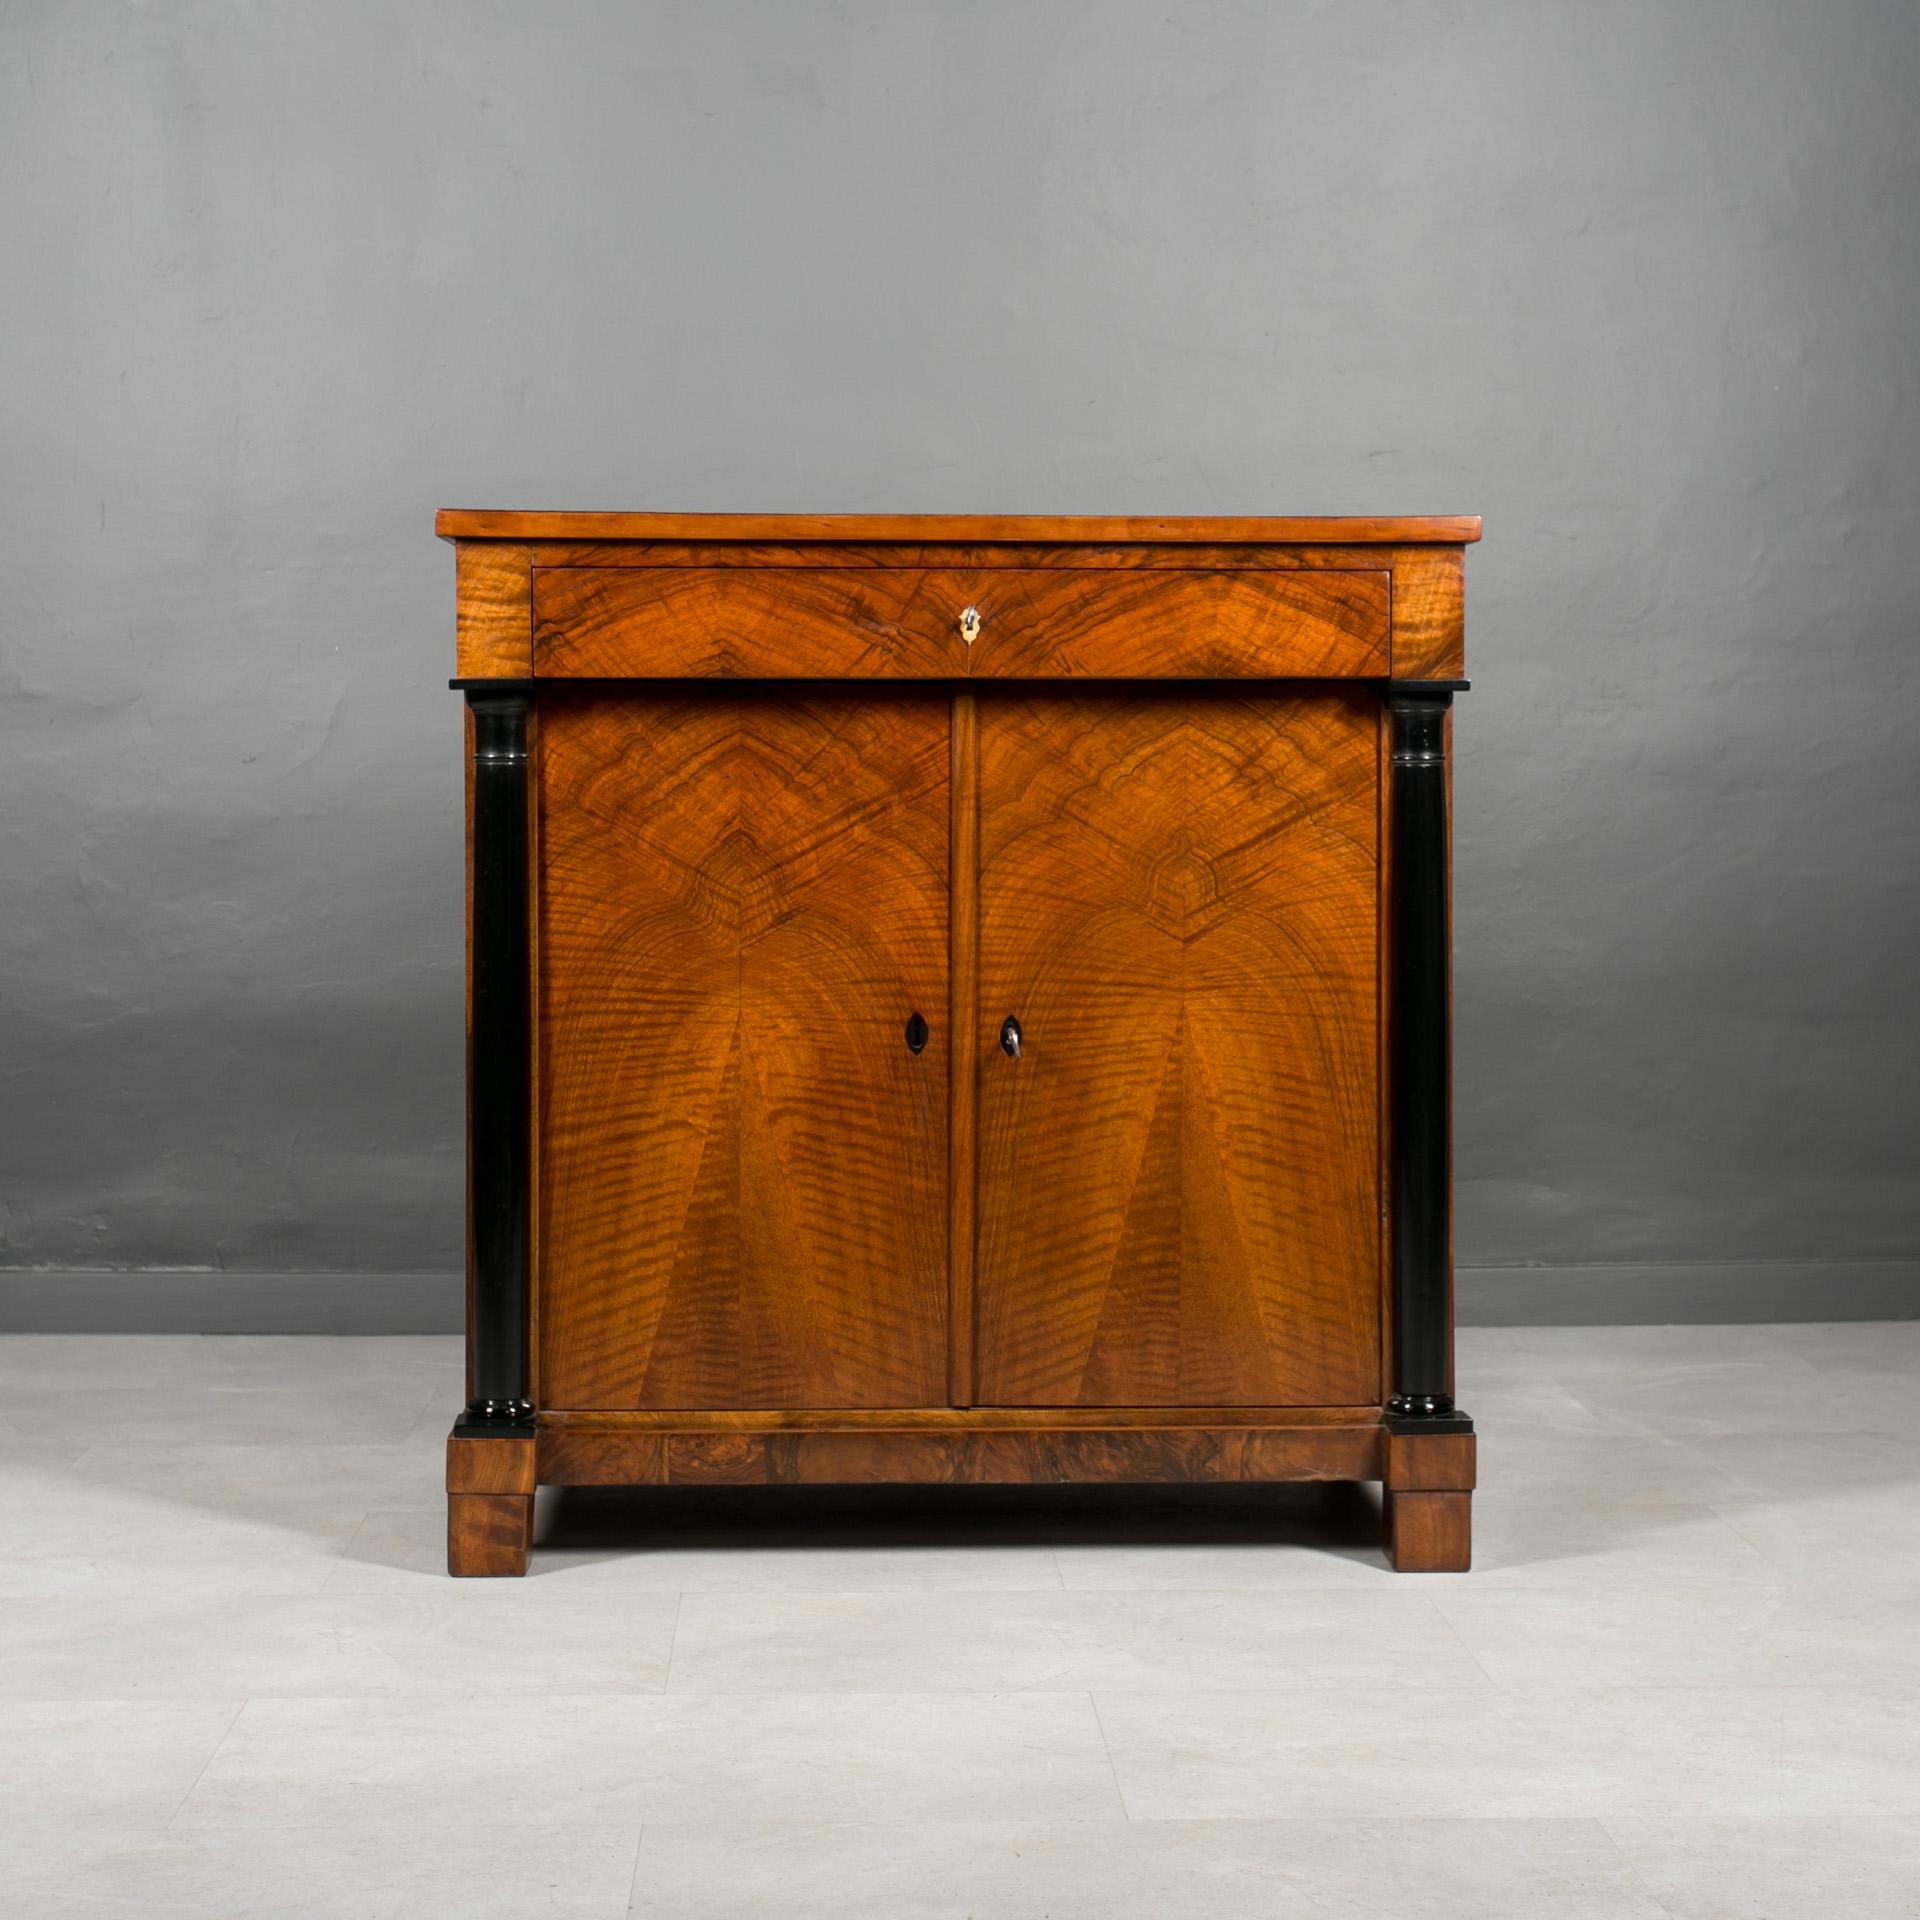 Discover a timeless treasure with this exquisite German cabinet dating back to 19th Century. Crafted from durable coniferous wood and adorned with stunning walnut veneer, this piece exudes elegance and craftsmanship. Meticulously restored, the